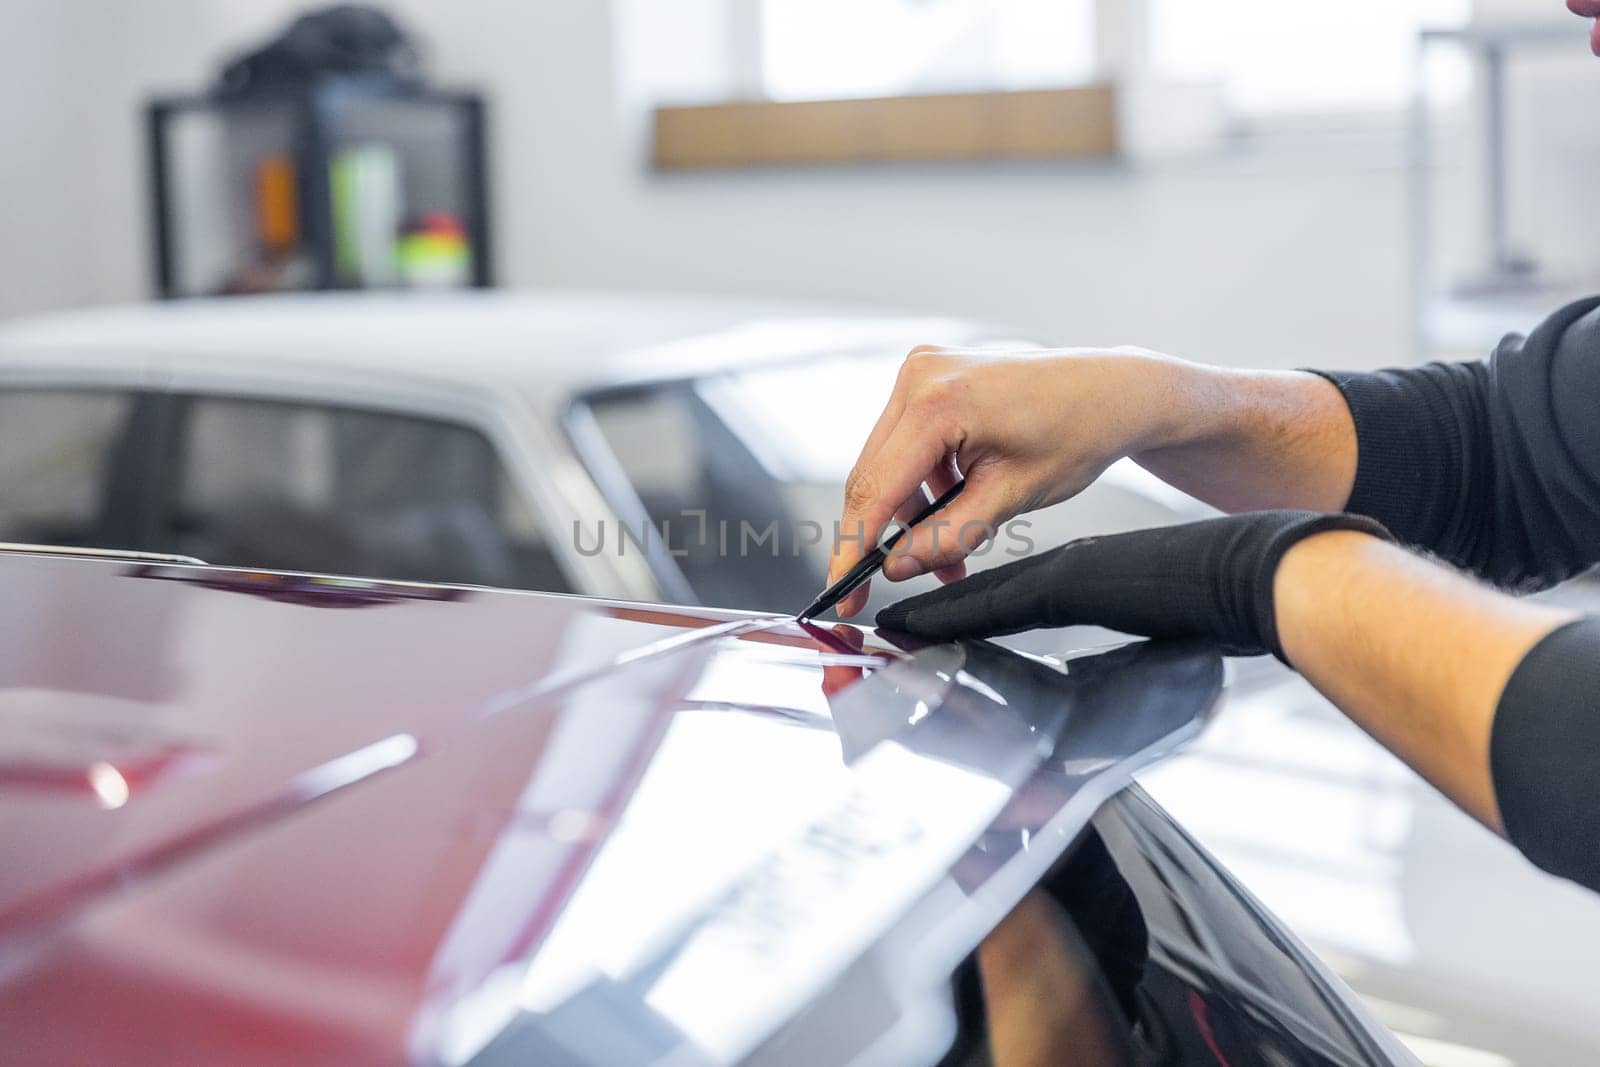 Process of gluing or wrapping a new foil wrap to a car, car detailing concept by Kadula